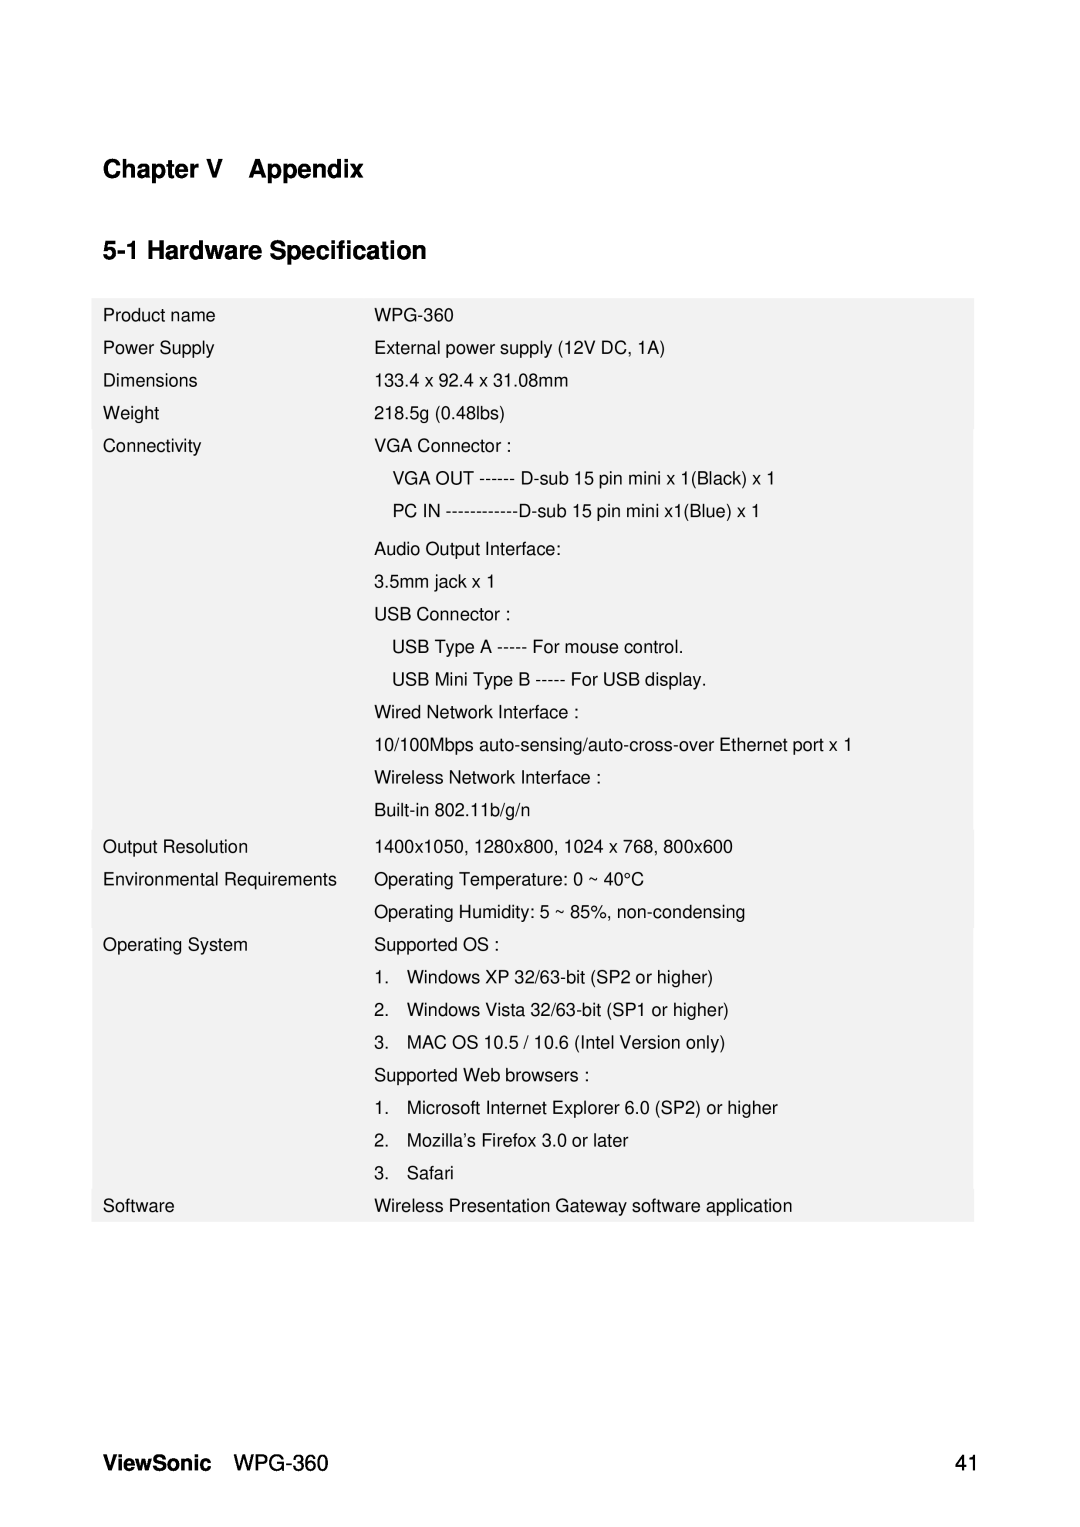 ViewSonic manual Chapter V Appendix 5-1 Hardware Specification, ViewSonic WPG-360 